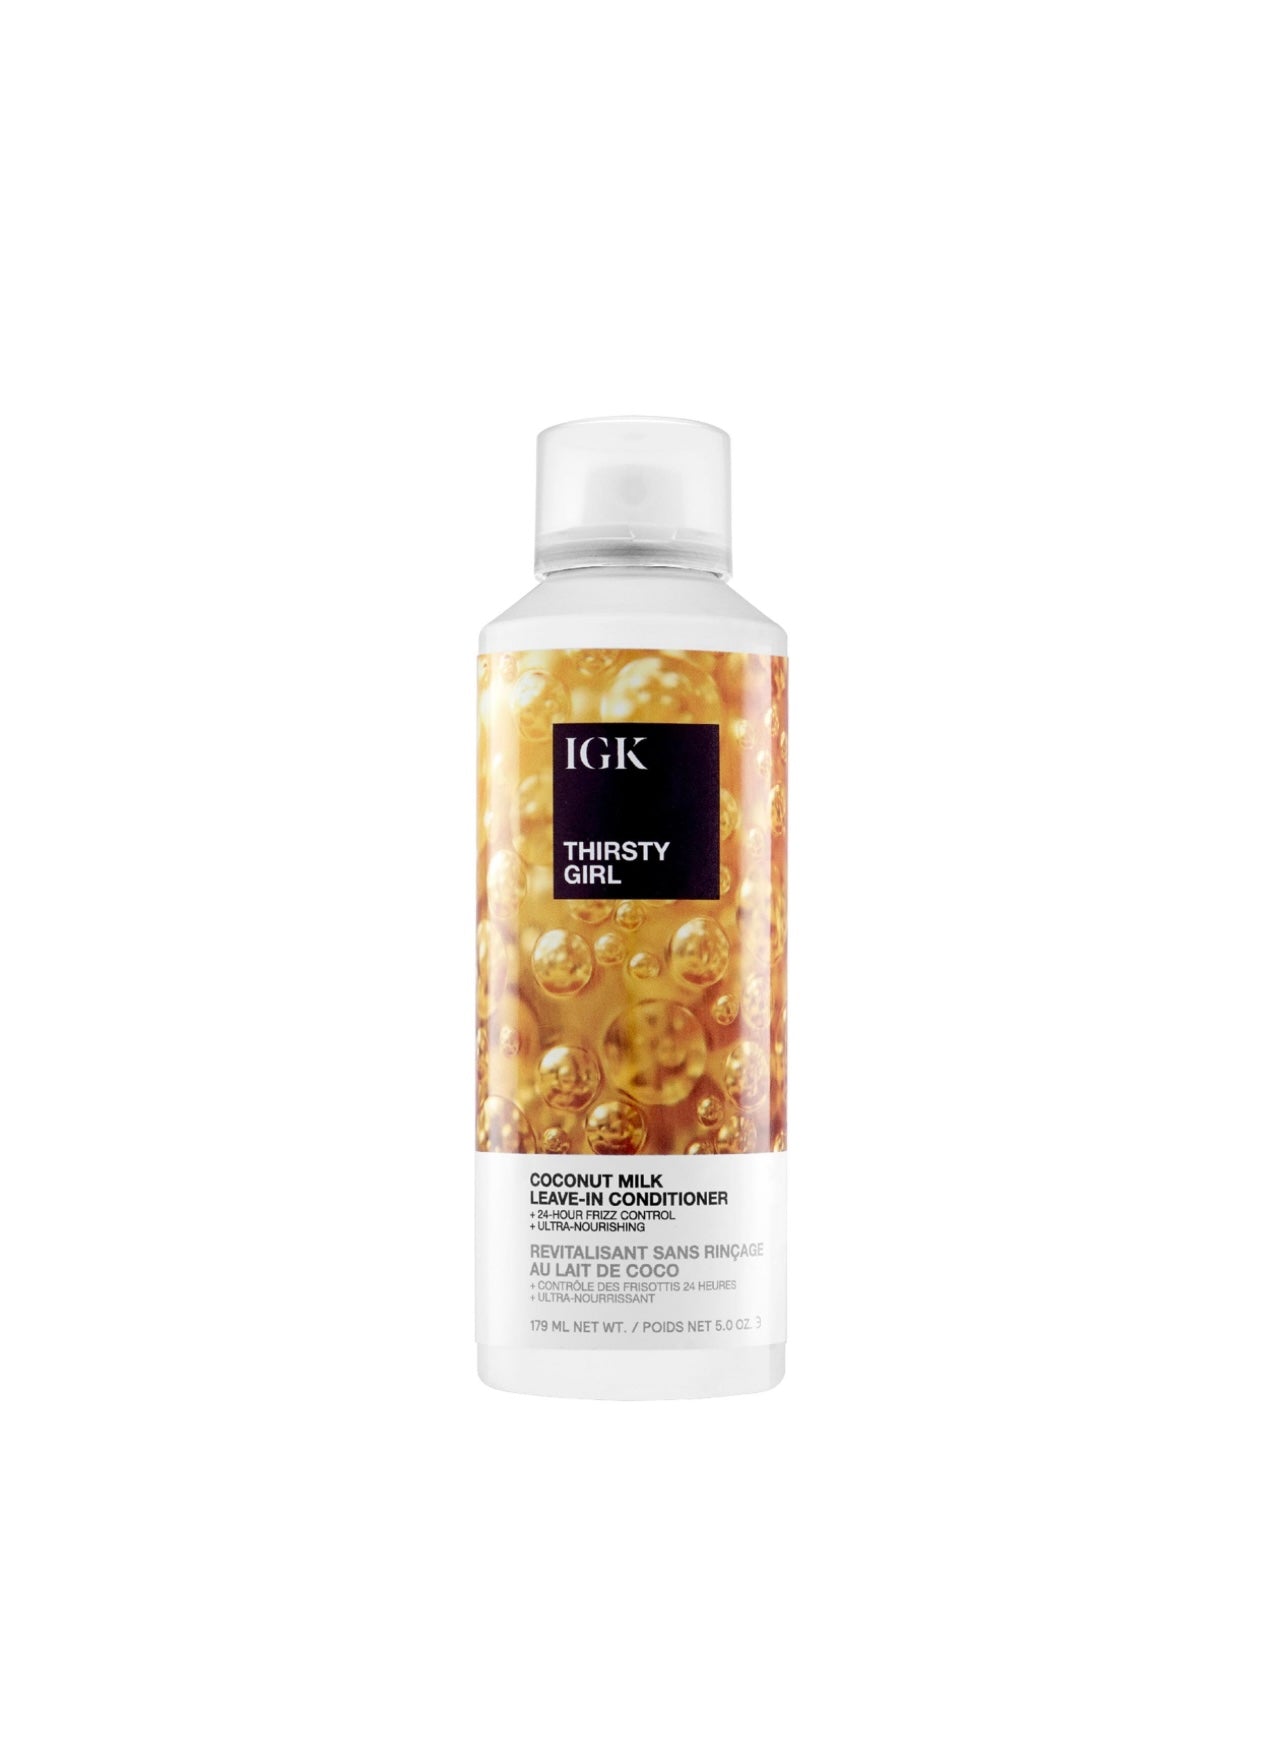 IGK Thirsty Girl coconut milk leave-in conditioner 24 hour frizz control